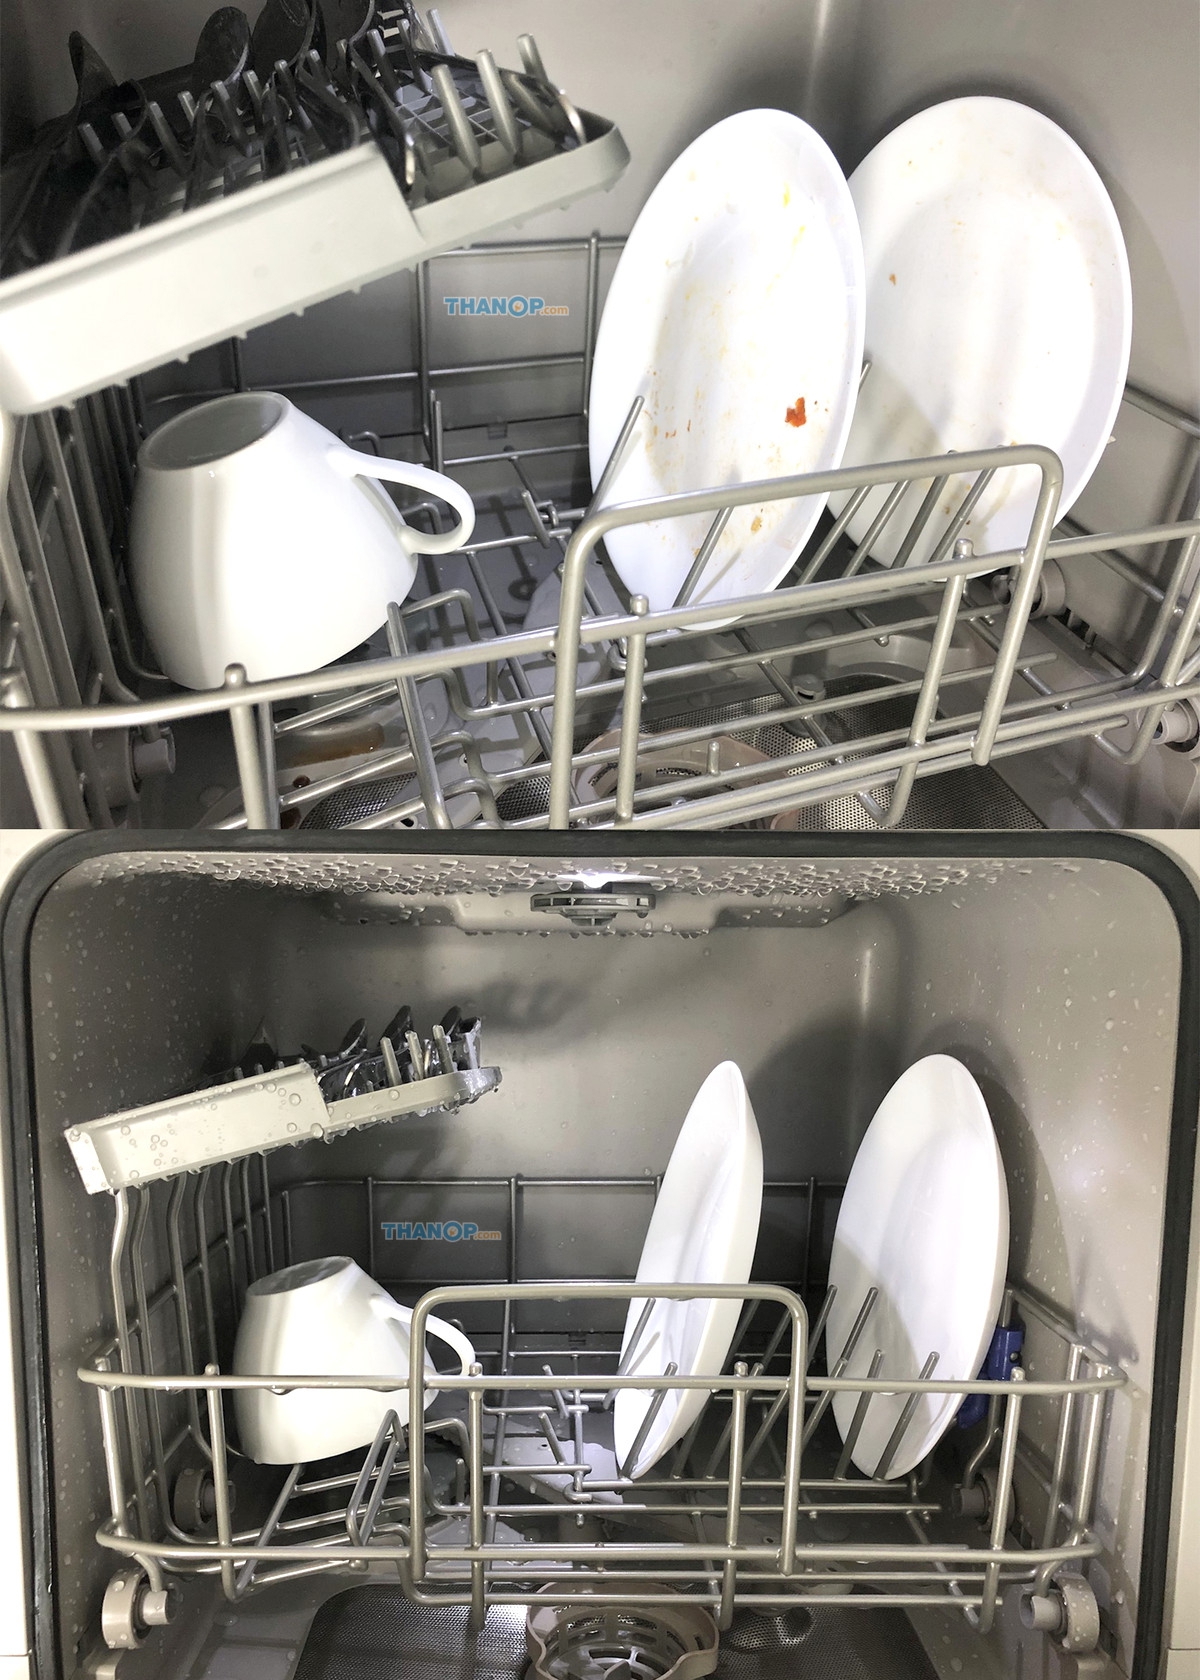 mister-robot-home-dishwasher-before-and-after-washing-inside-machine